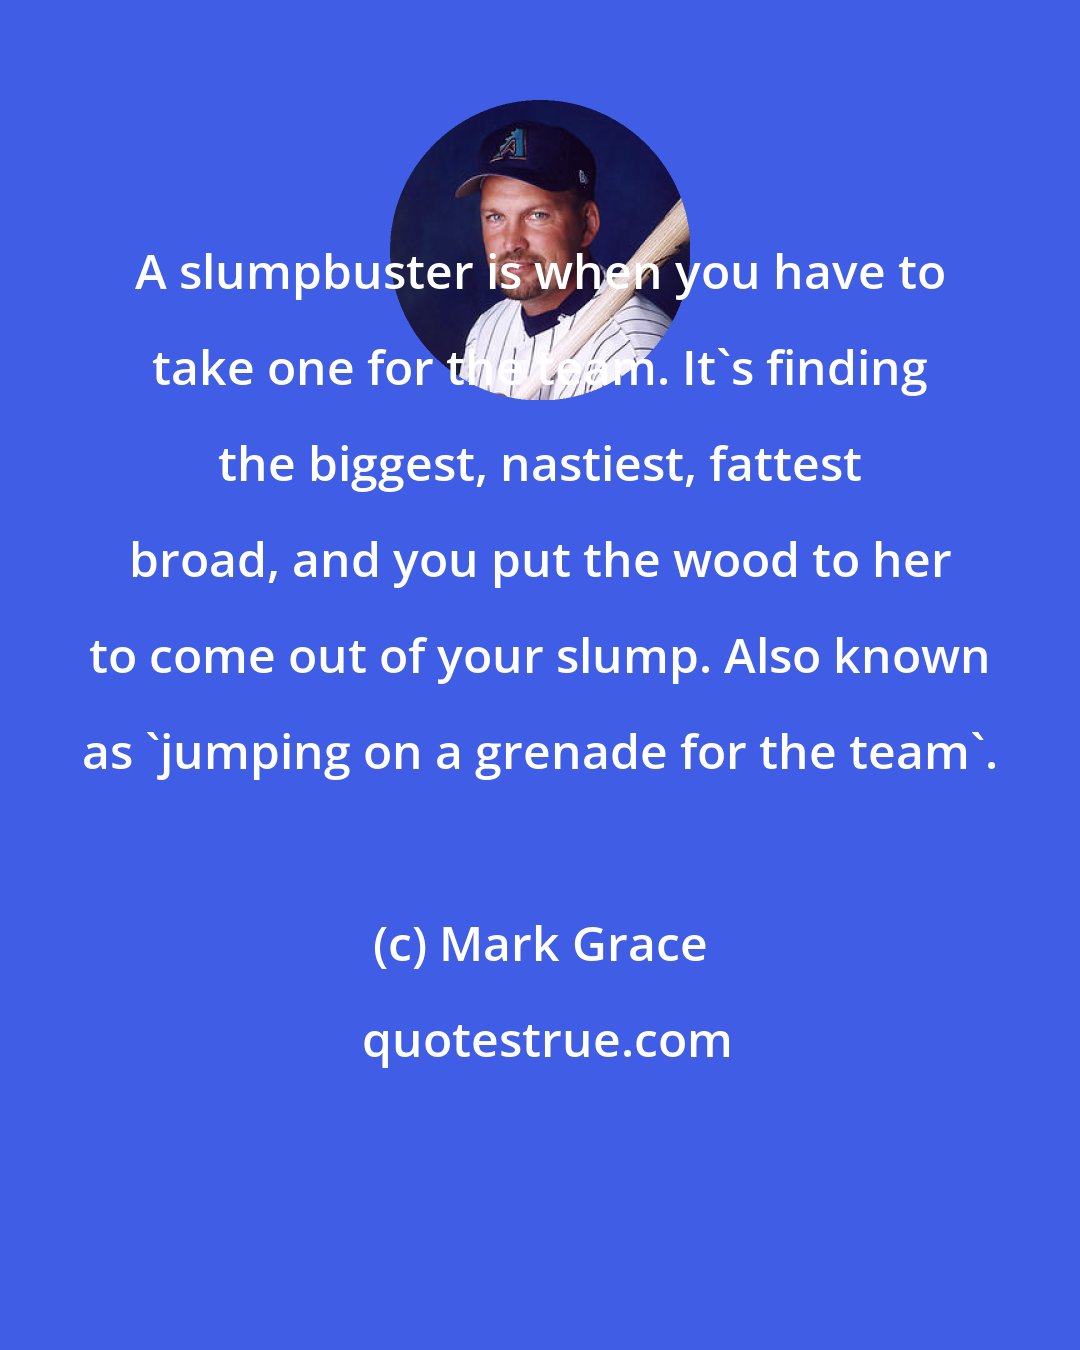 Mark Grace: A slumpbuster is when you have to take one for the team. It's finding the biggest, nastiest, fattest broad, and you put the wood to her to come out of your slump. Also known as 'jumping on a grenade for the team'.